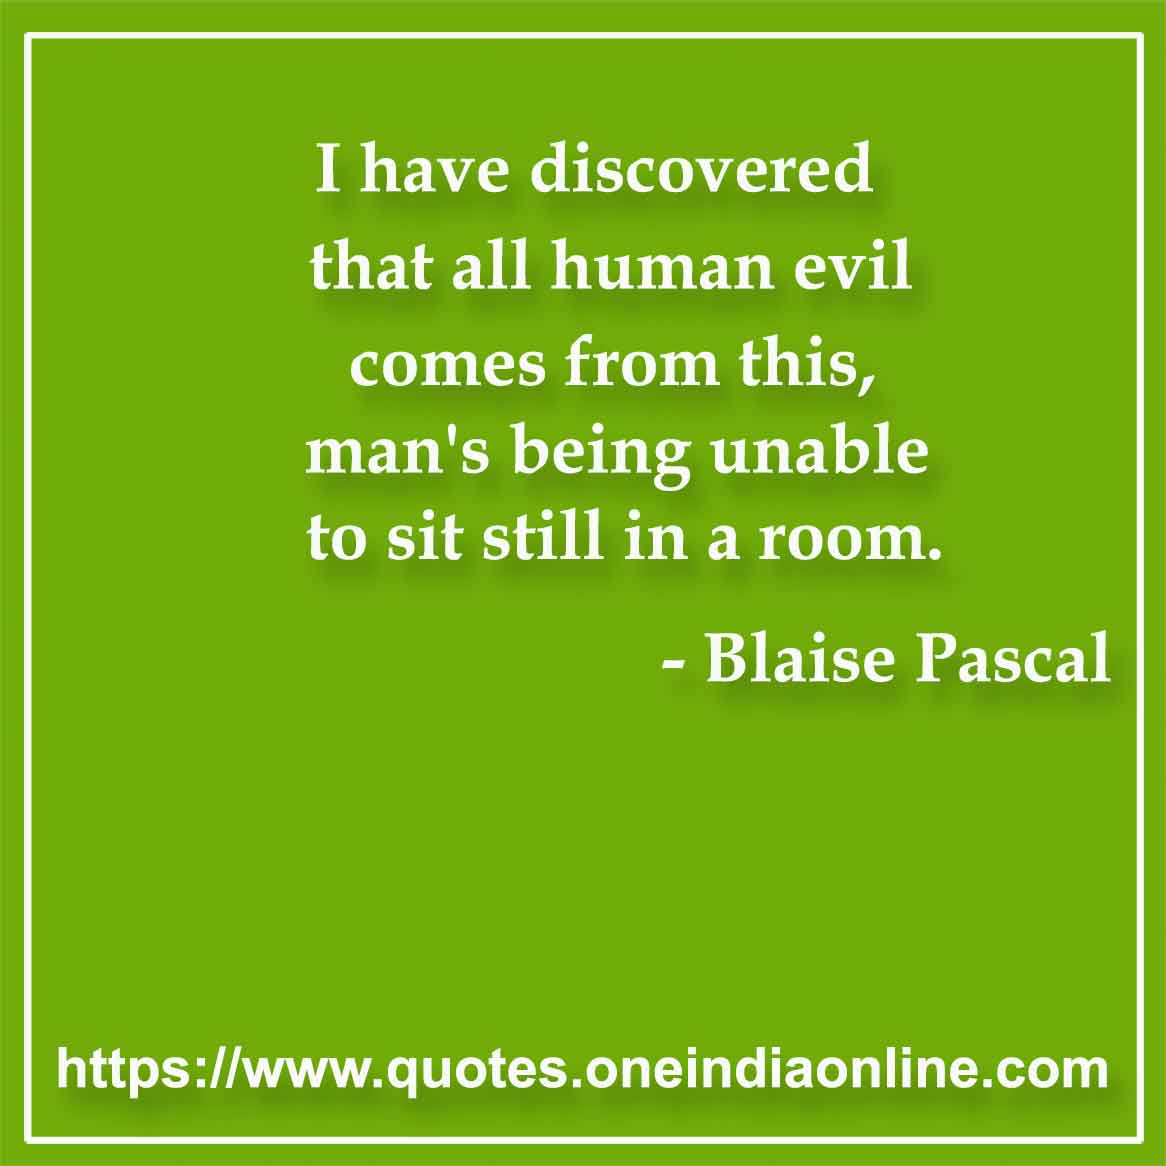 I have discovered that all human evil comes from this, man's being unable to sit still in a room.

- Mankind Quotes Blaise Pascal 